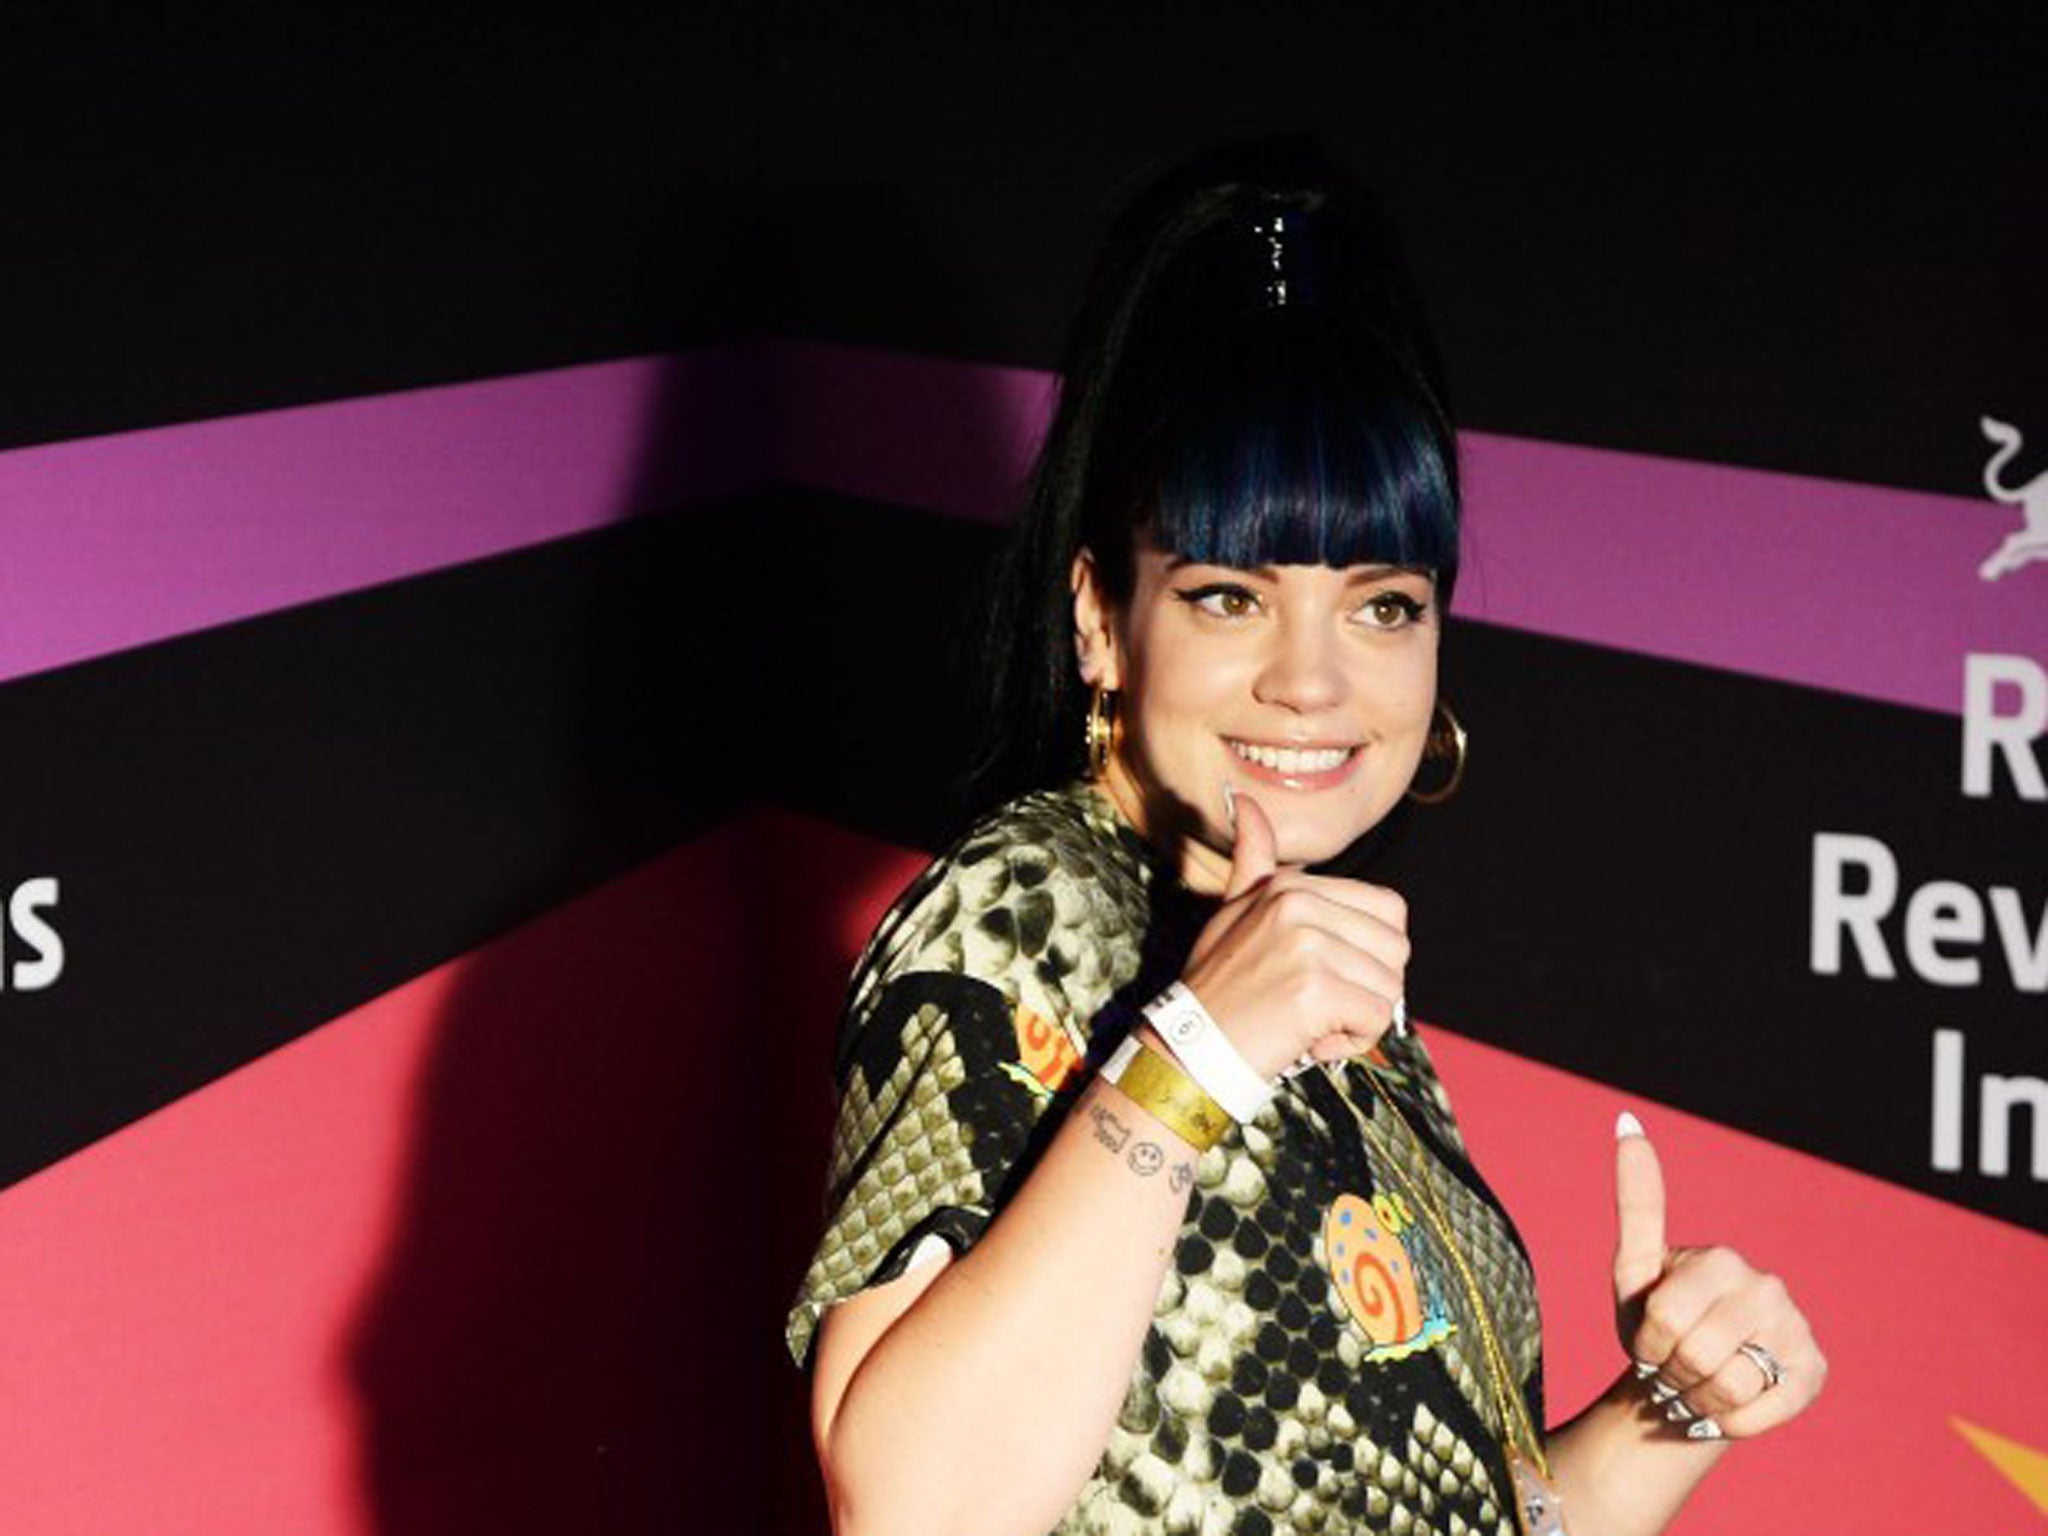 Lily Allen Returns To Number One With John Lewis Advert Song Somewhere Only We Know The 